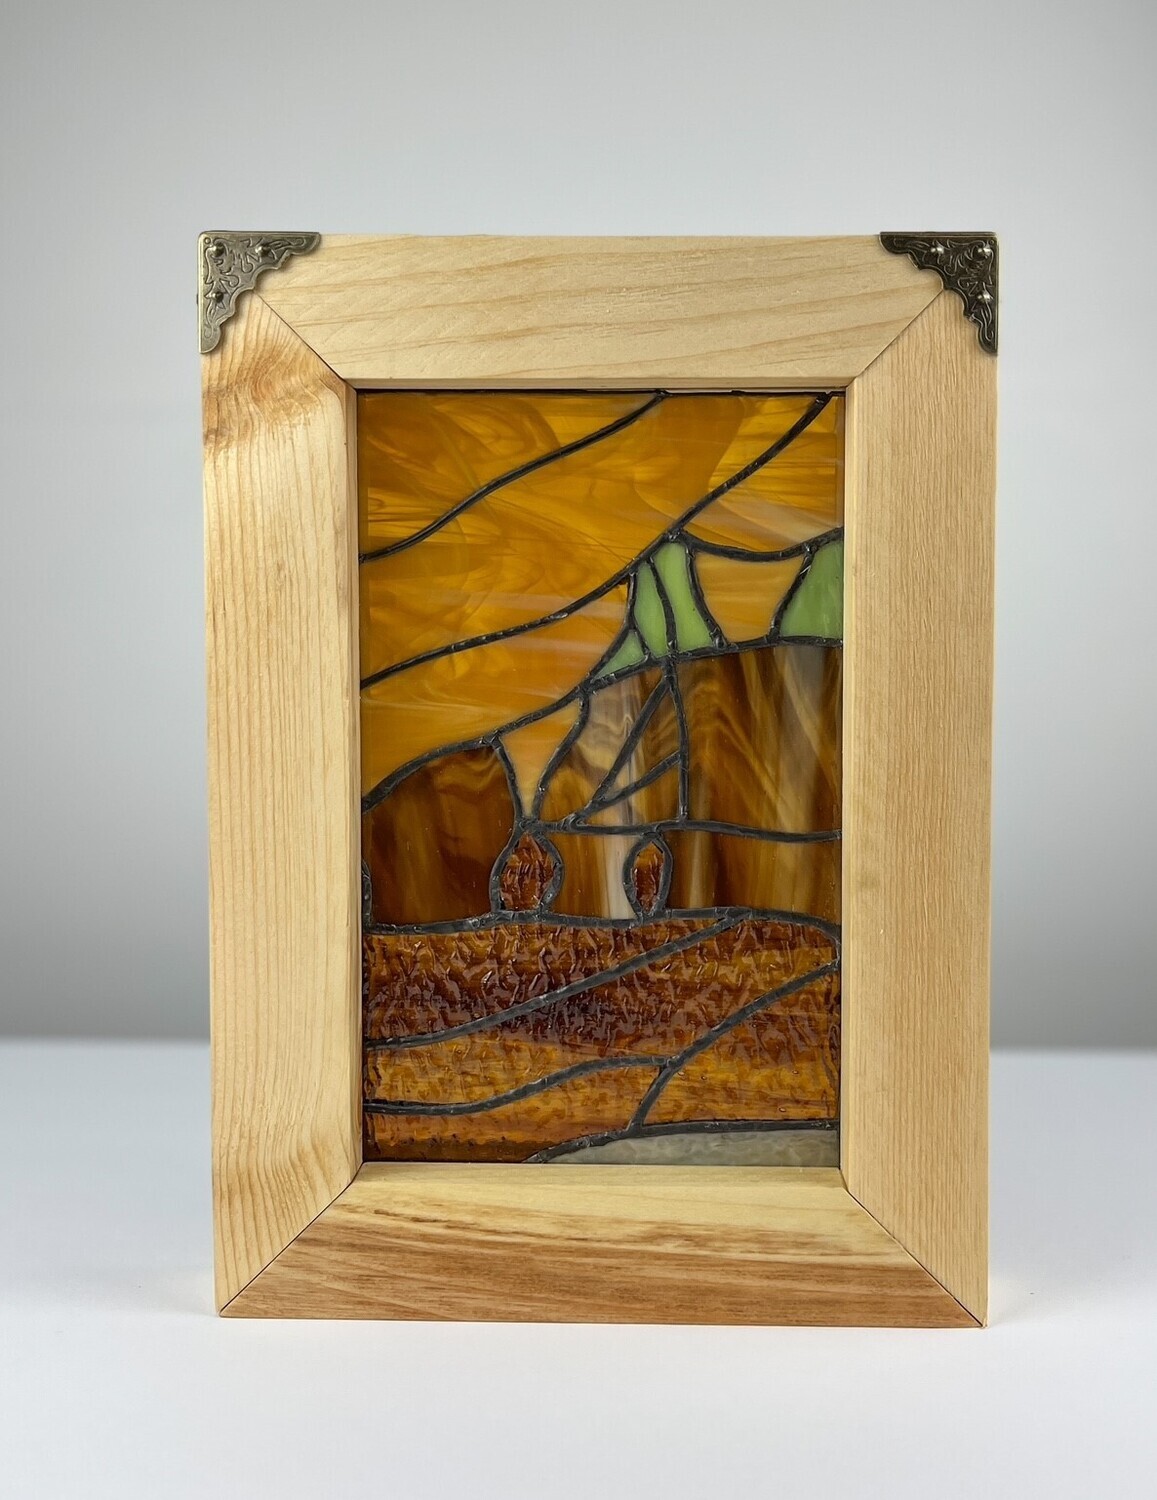 "Hopewell Rocks 7" 8x12" Framed Stained Glass